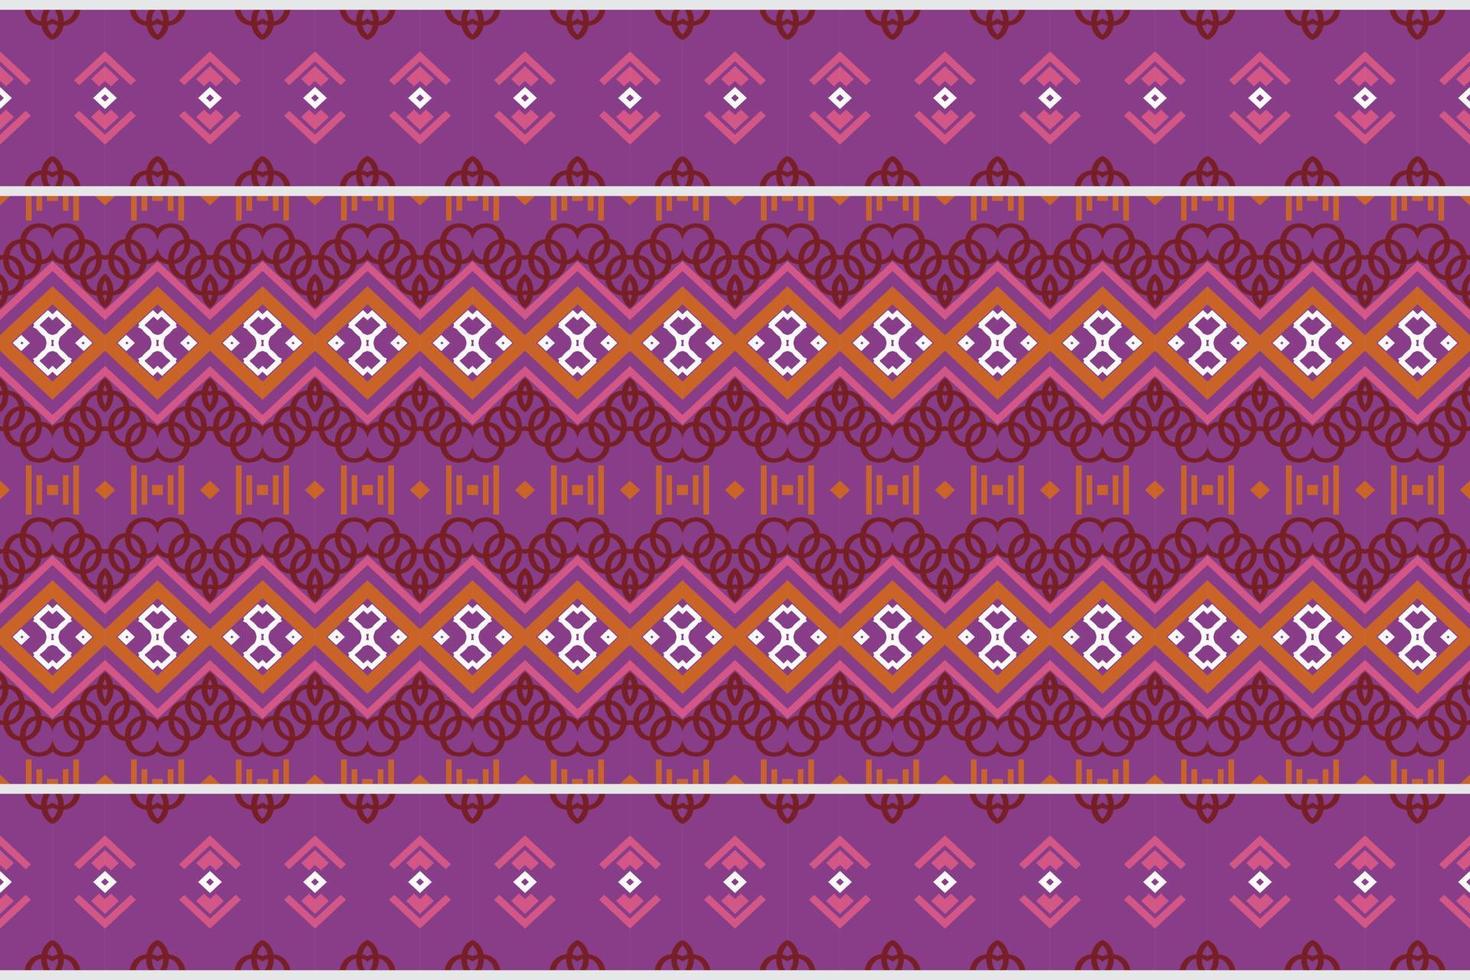 Pattern tribal art designs. traditional patterned carpets It is a pattern geometric shapes. Create beautiful fabric patterns. Design for print. Using in the fashion industry. vector